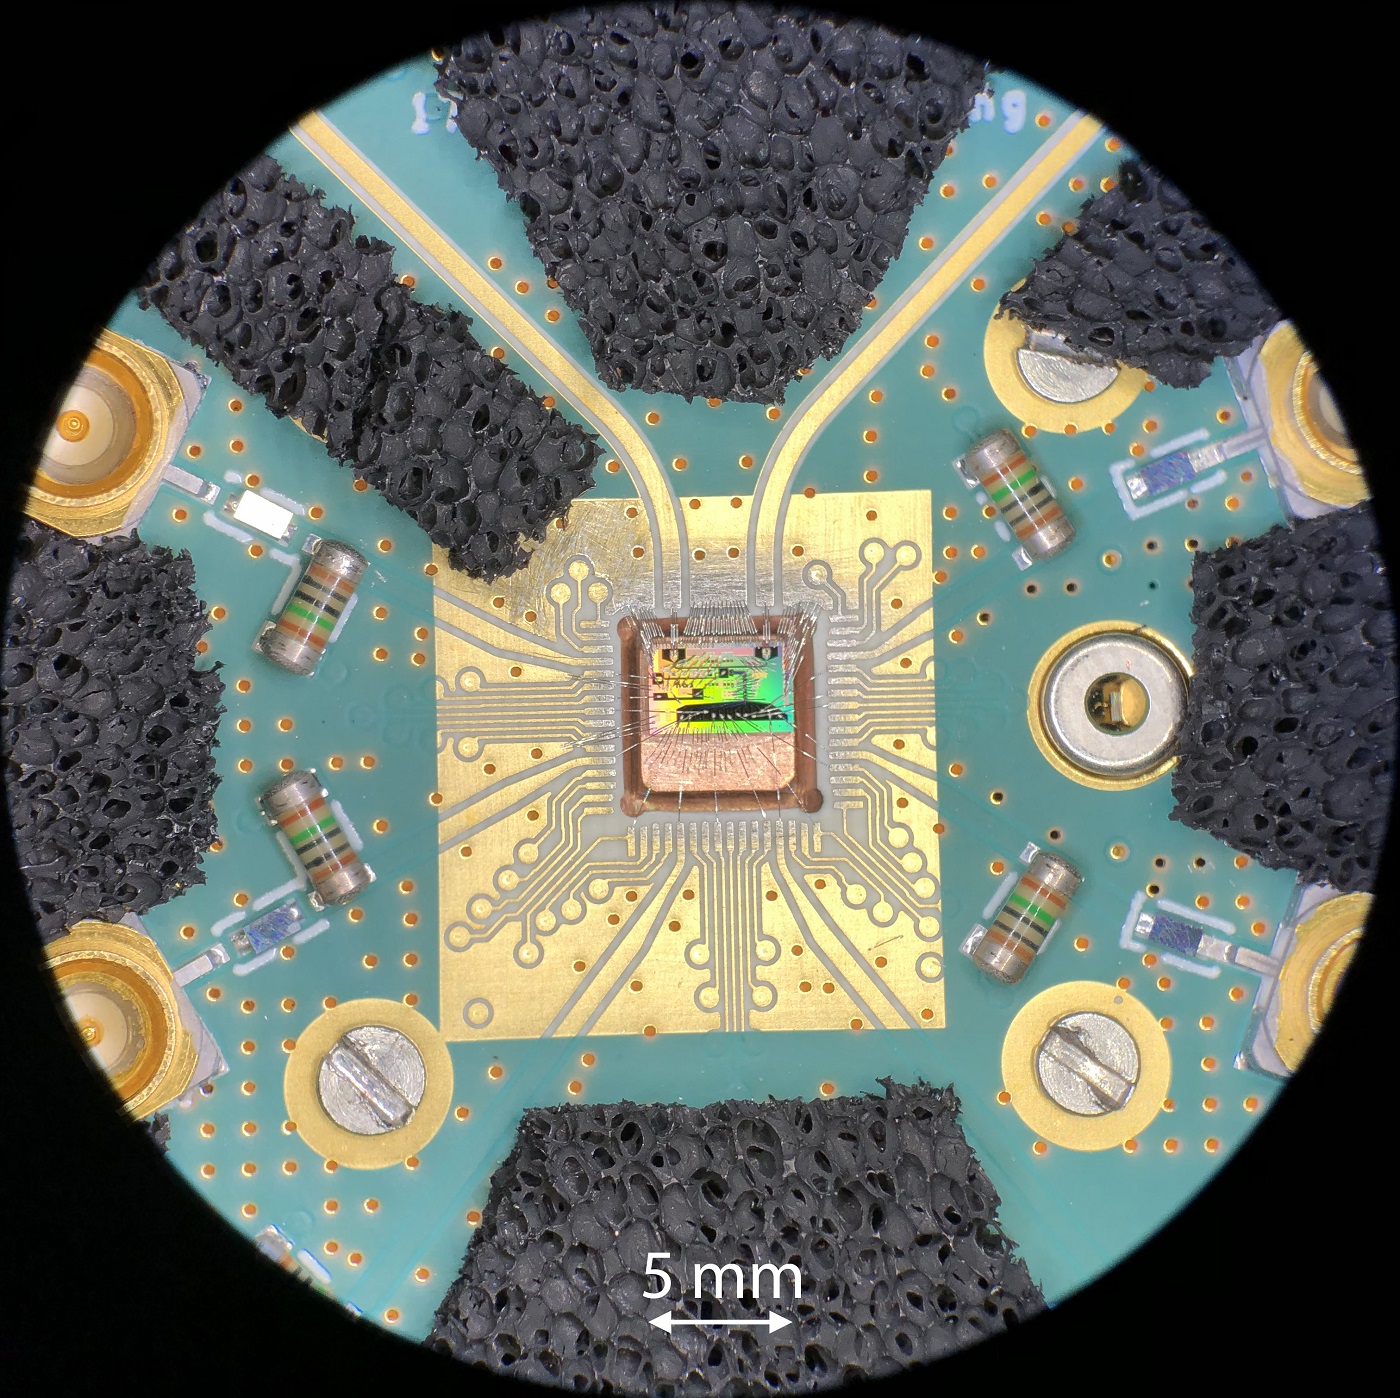 Optical microscope image of the quantum chip electrically connected to a printed circuit board